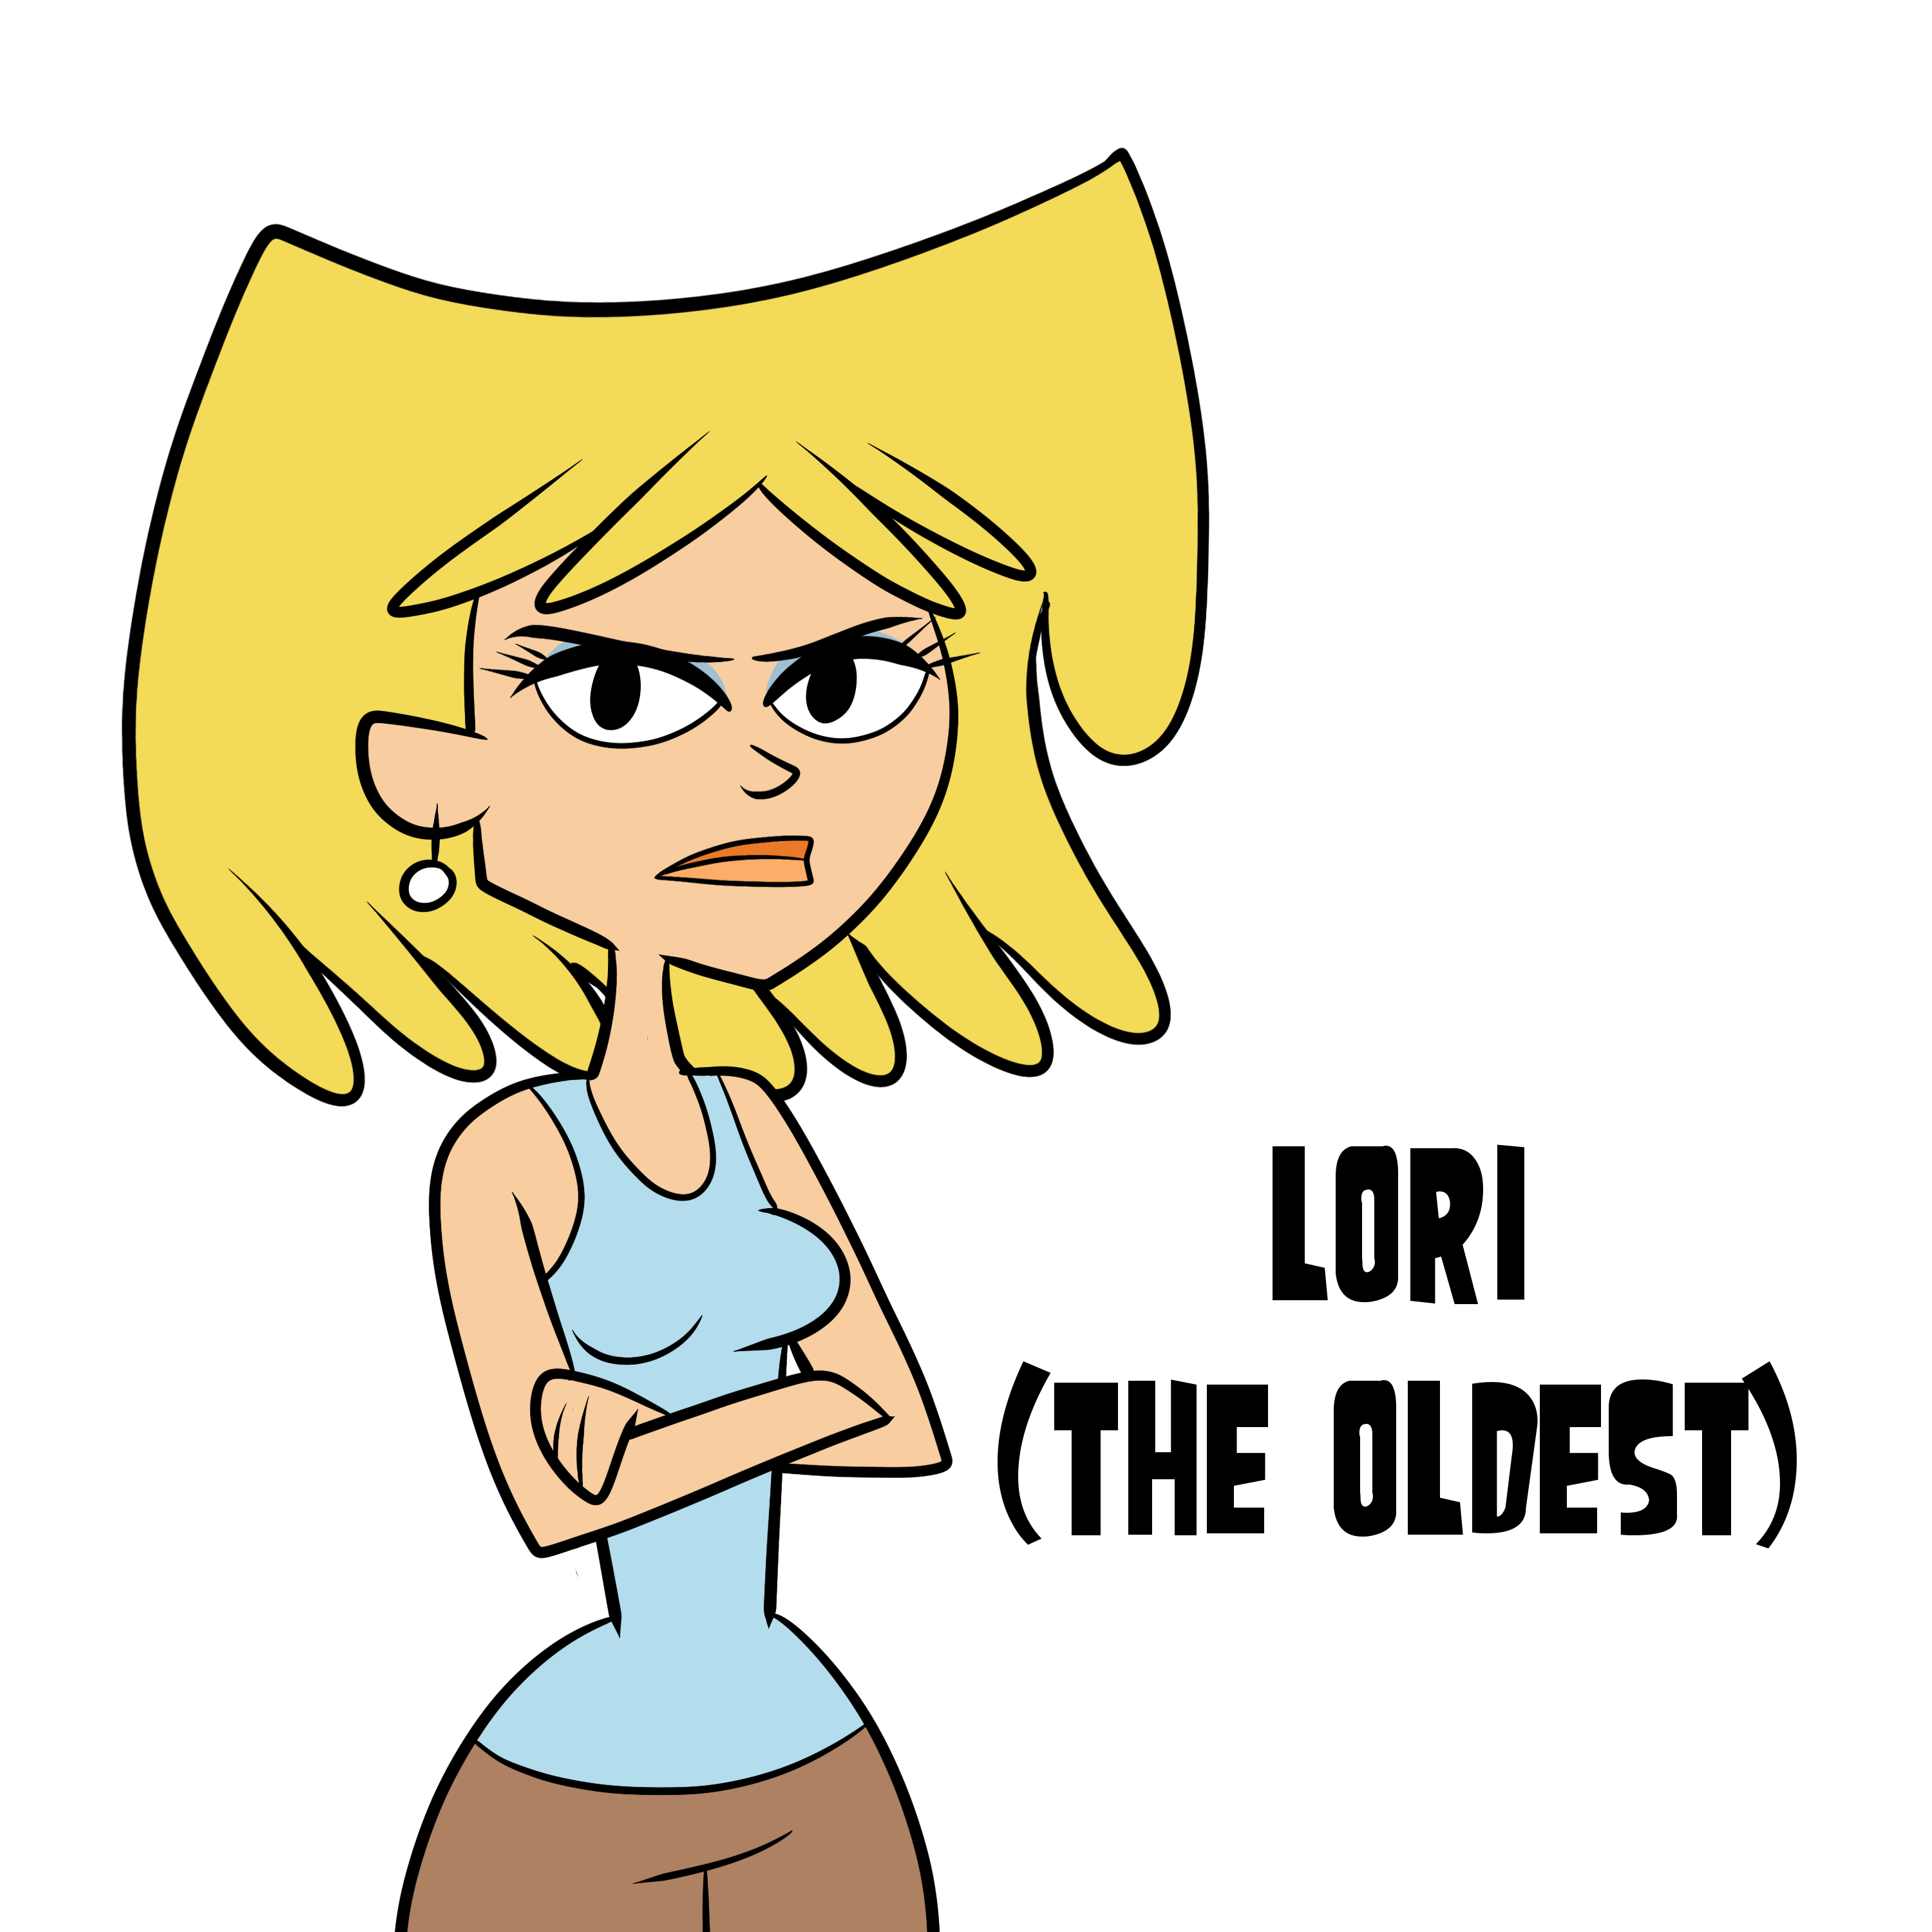 Lori from the loud house drawn with influence from my imagination. 